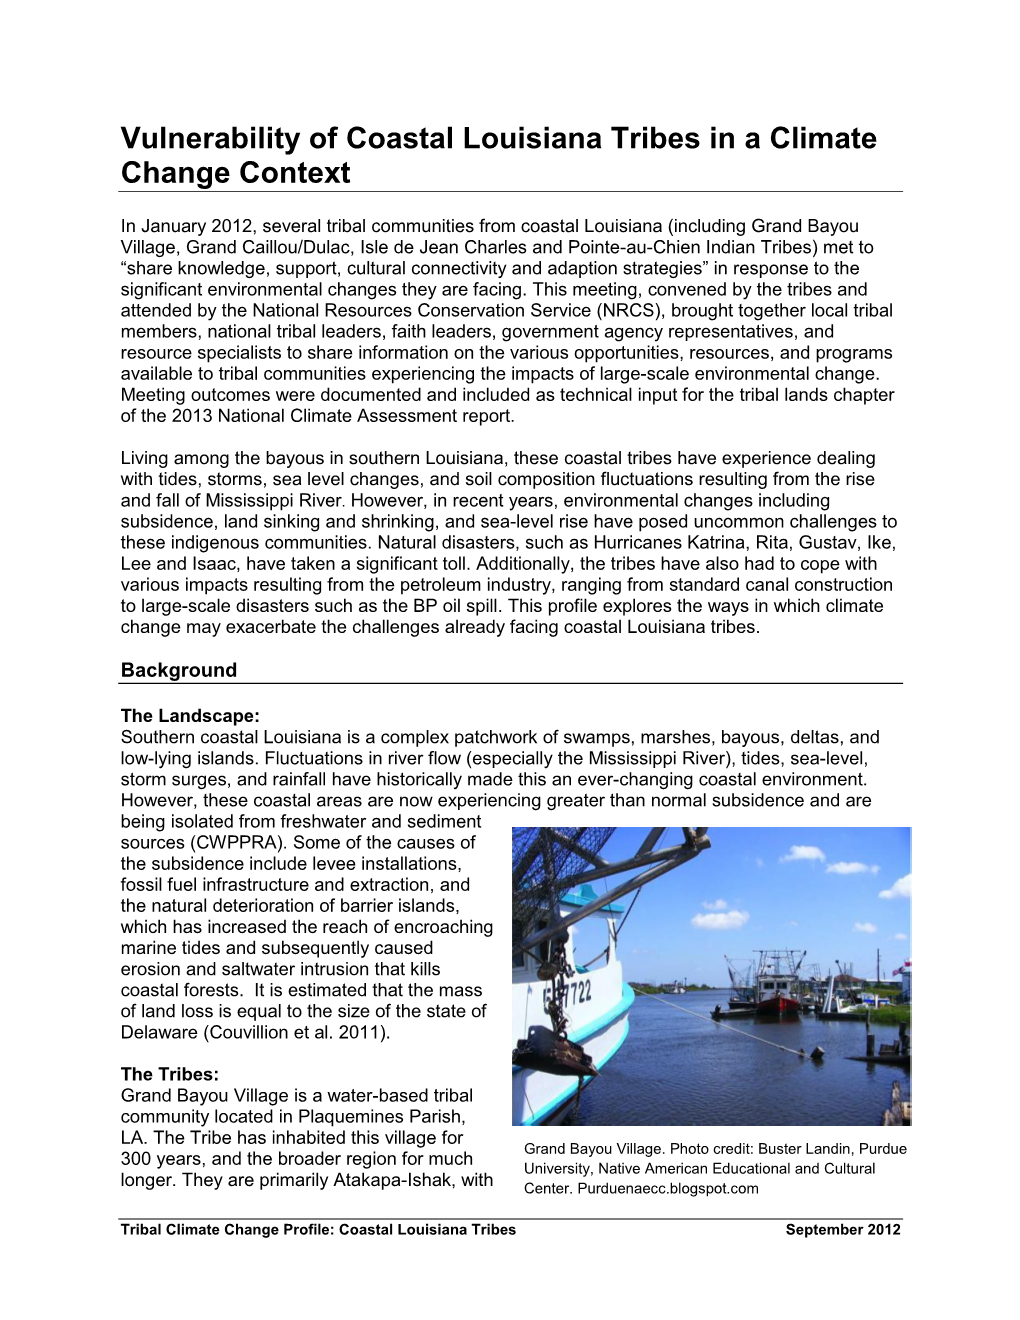 Vulnerability of Coastal Louisiana Tribes in a Climate Change Context